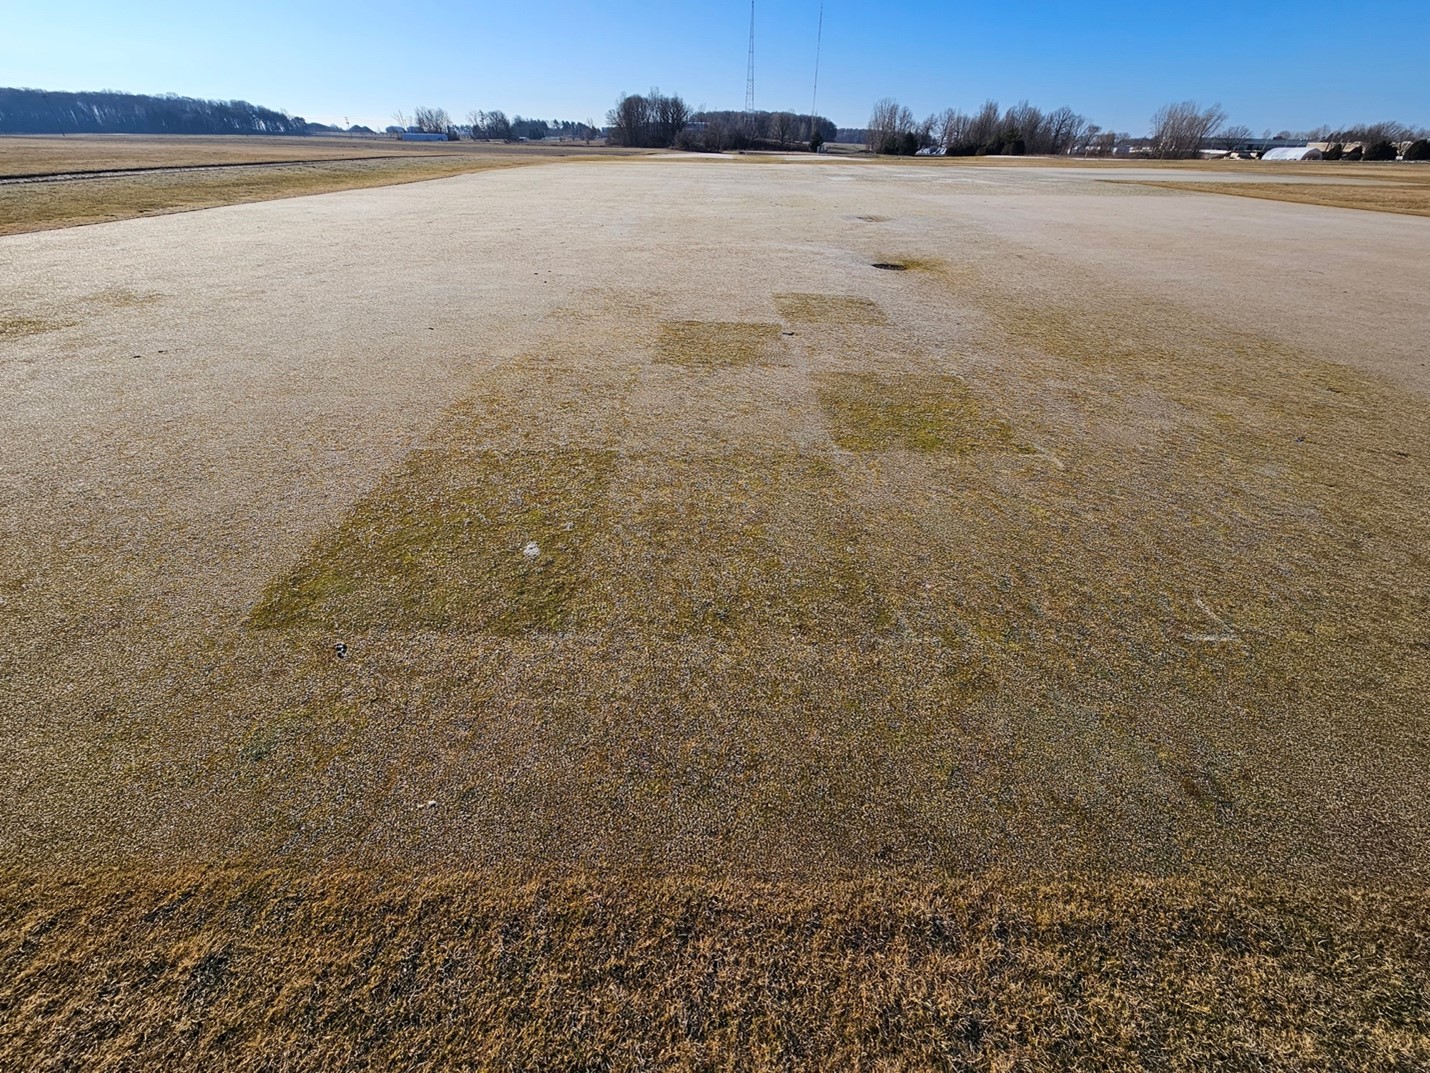 Turfgrass research plots with varying levels of frost.